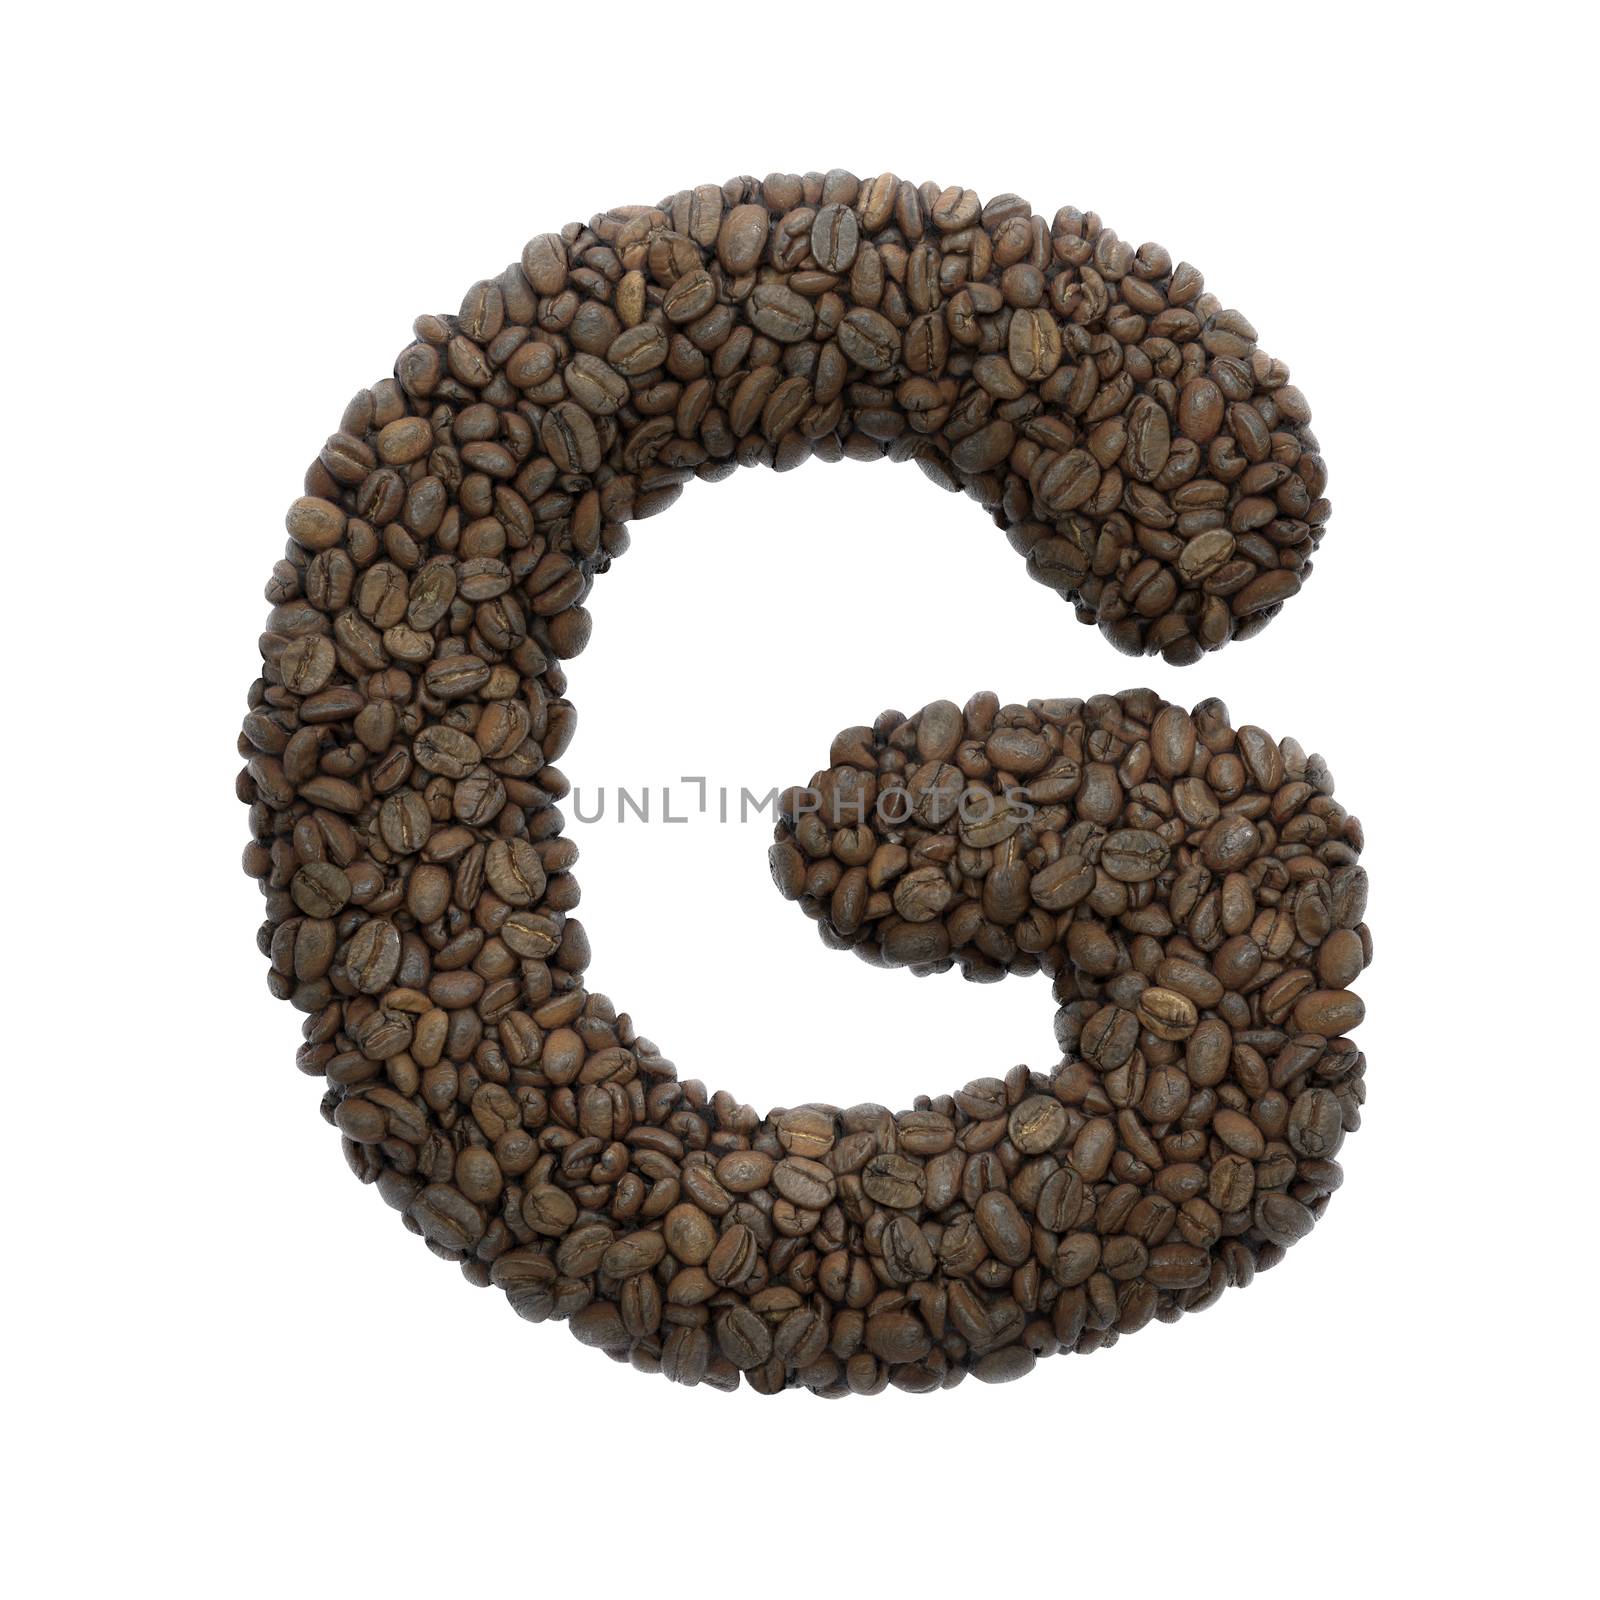 Coffee letter G - large 3d roasted beans font isolated on white background. This alphabet is perfect for creative illustrations related but not limited to Coffee, energy, insomnia...